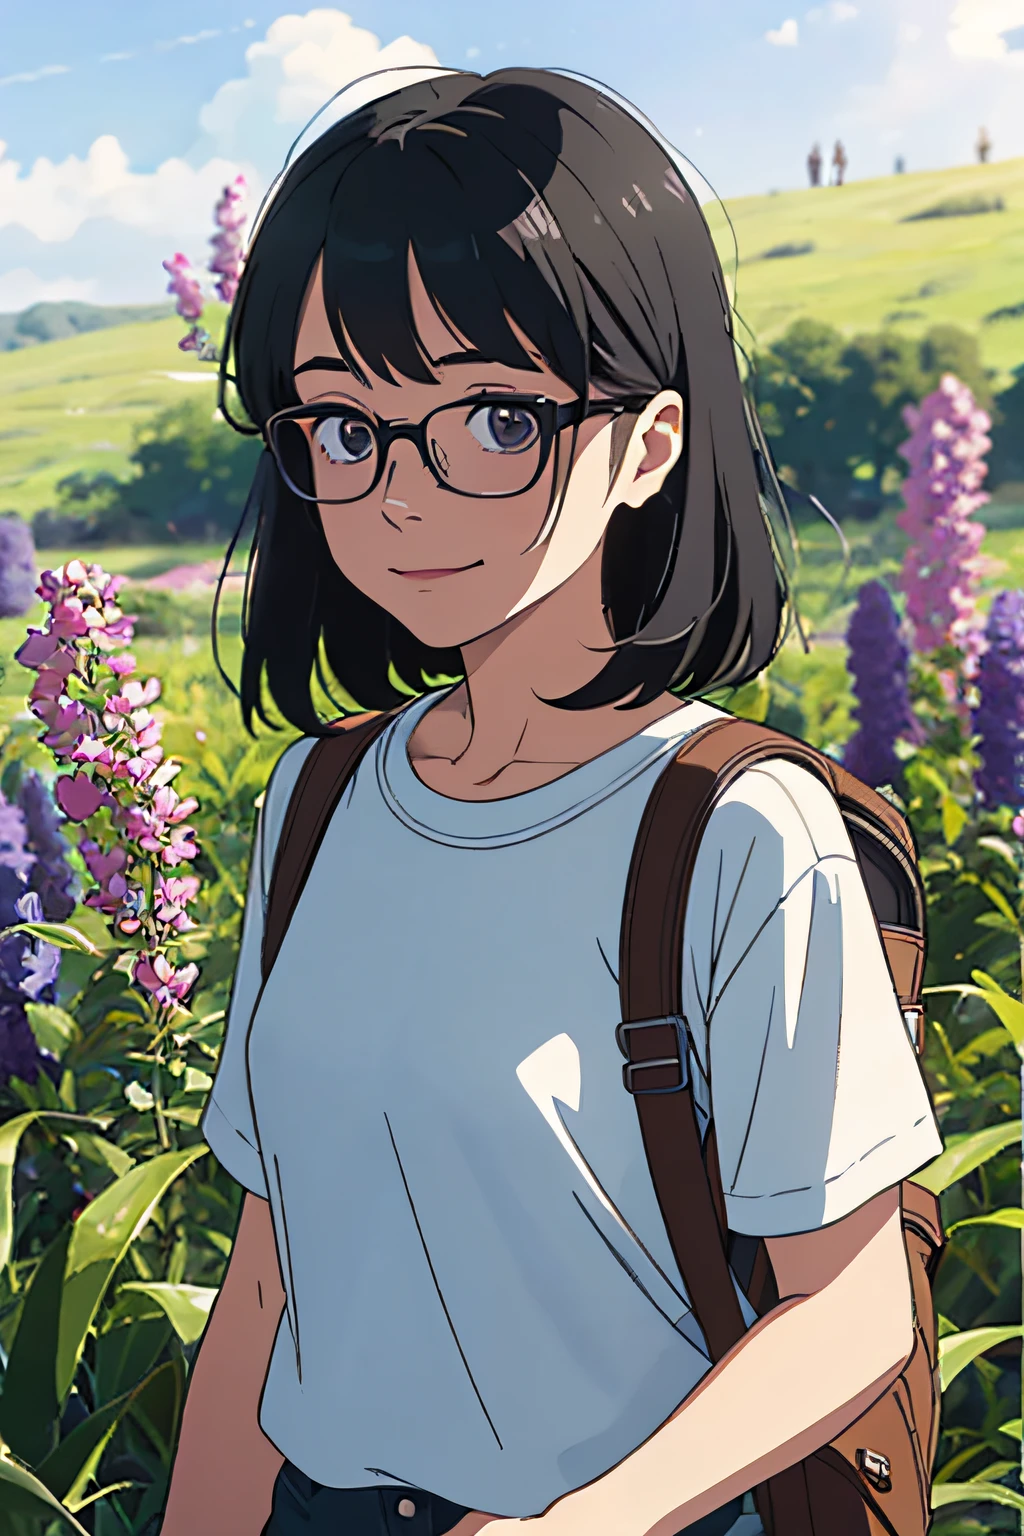 Anime girl with glasses and backpack standing in a field of flowers ...